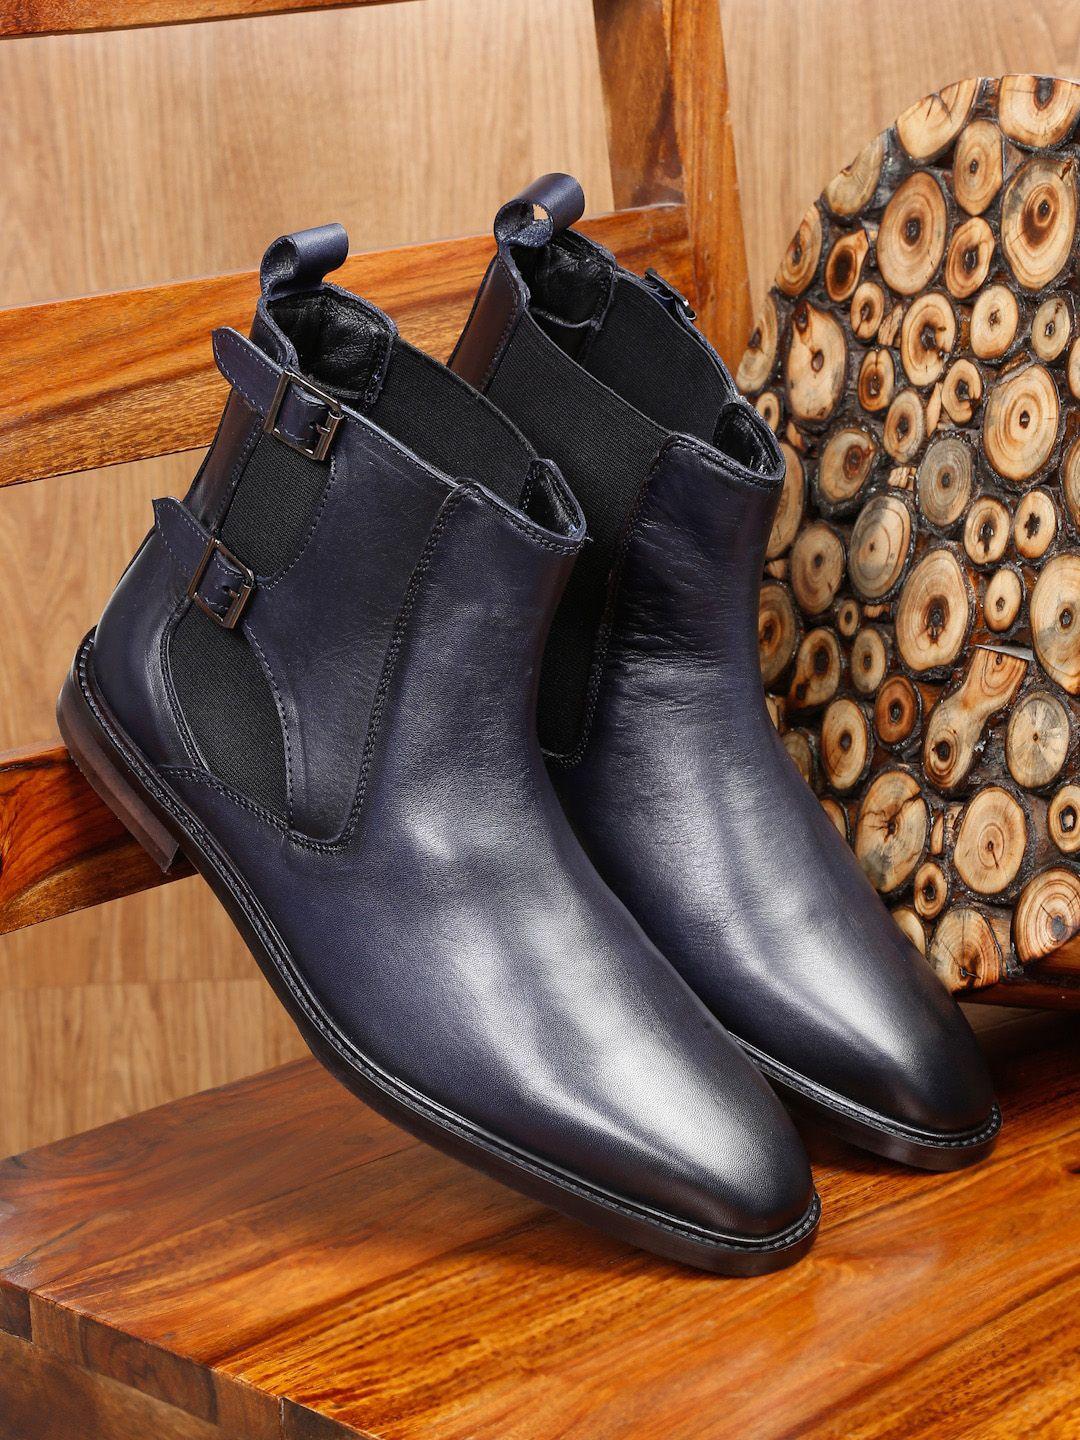 teakwood leathers men mid top leather chelsea boots with buckle detail